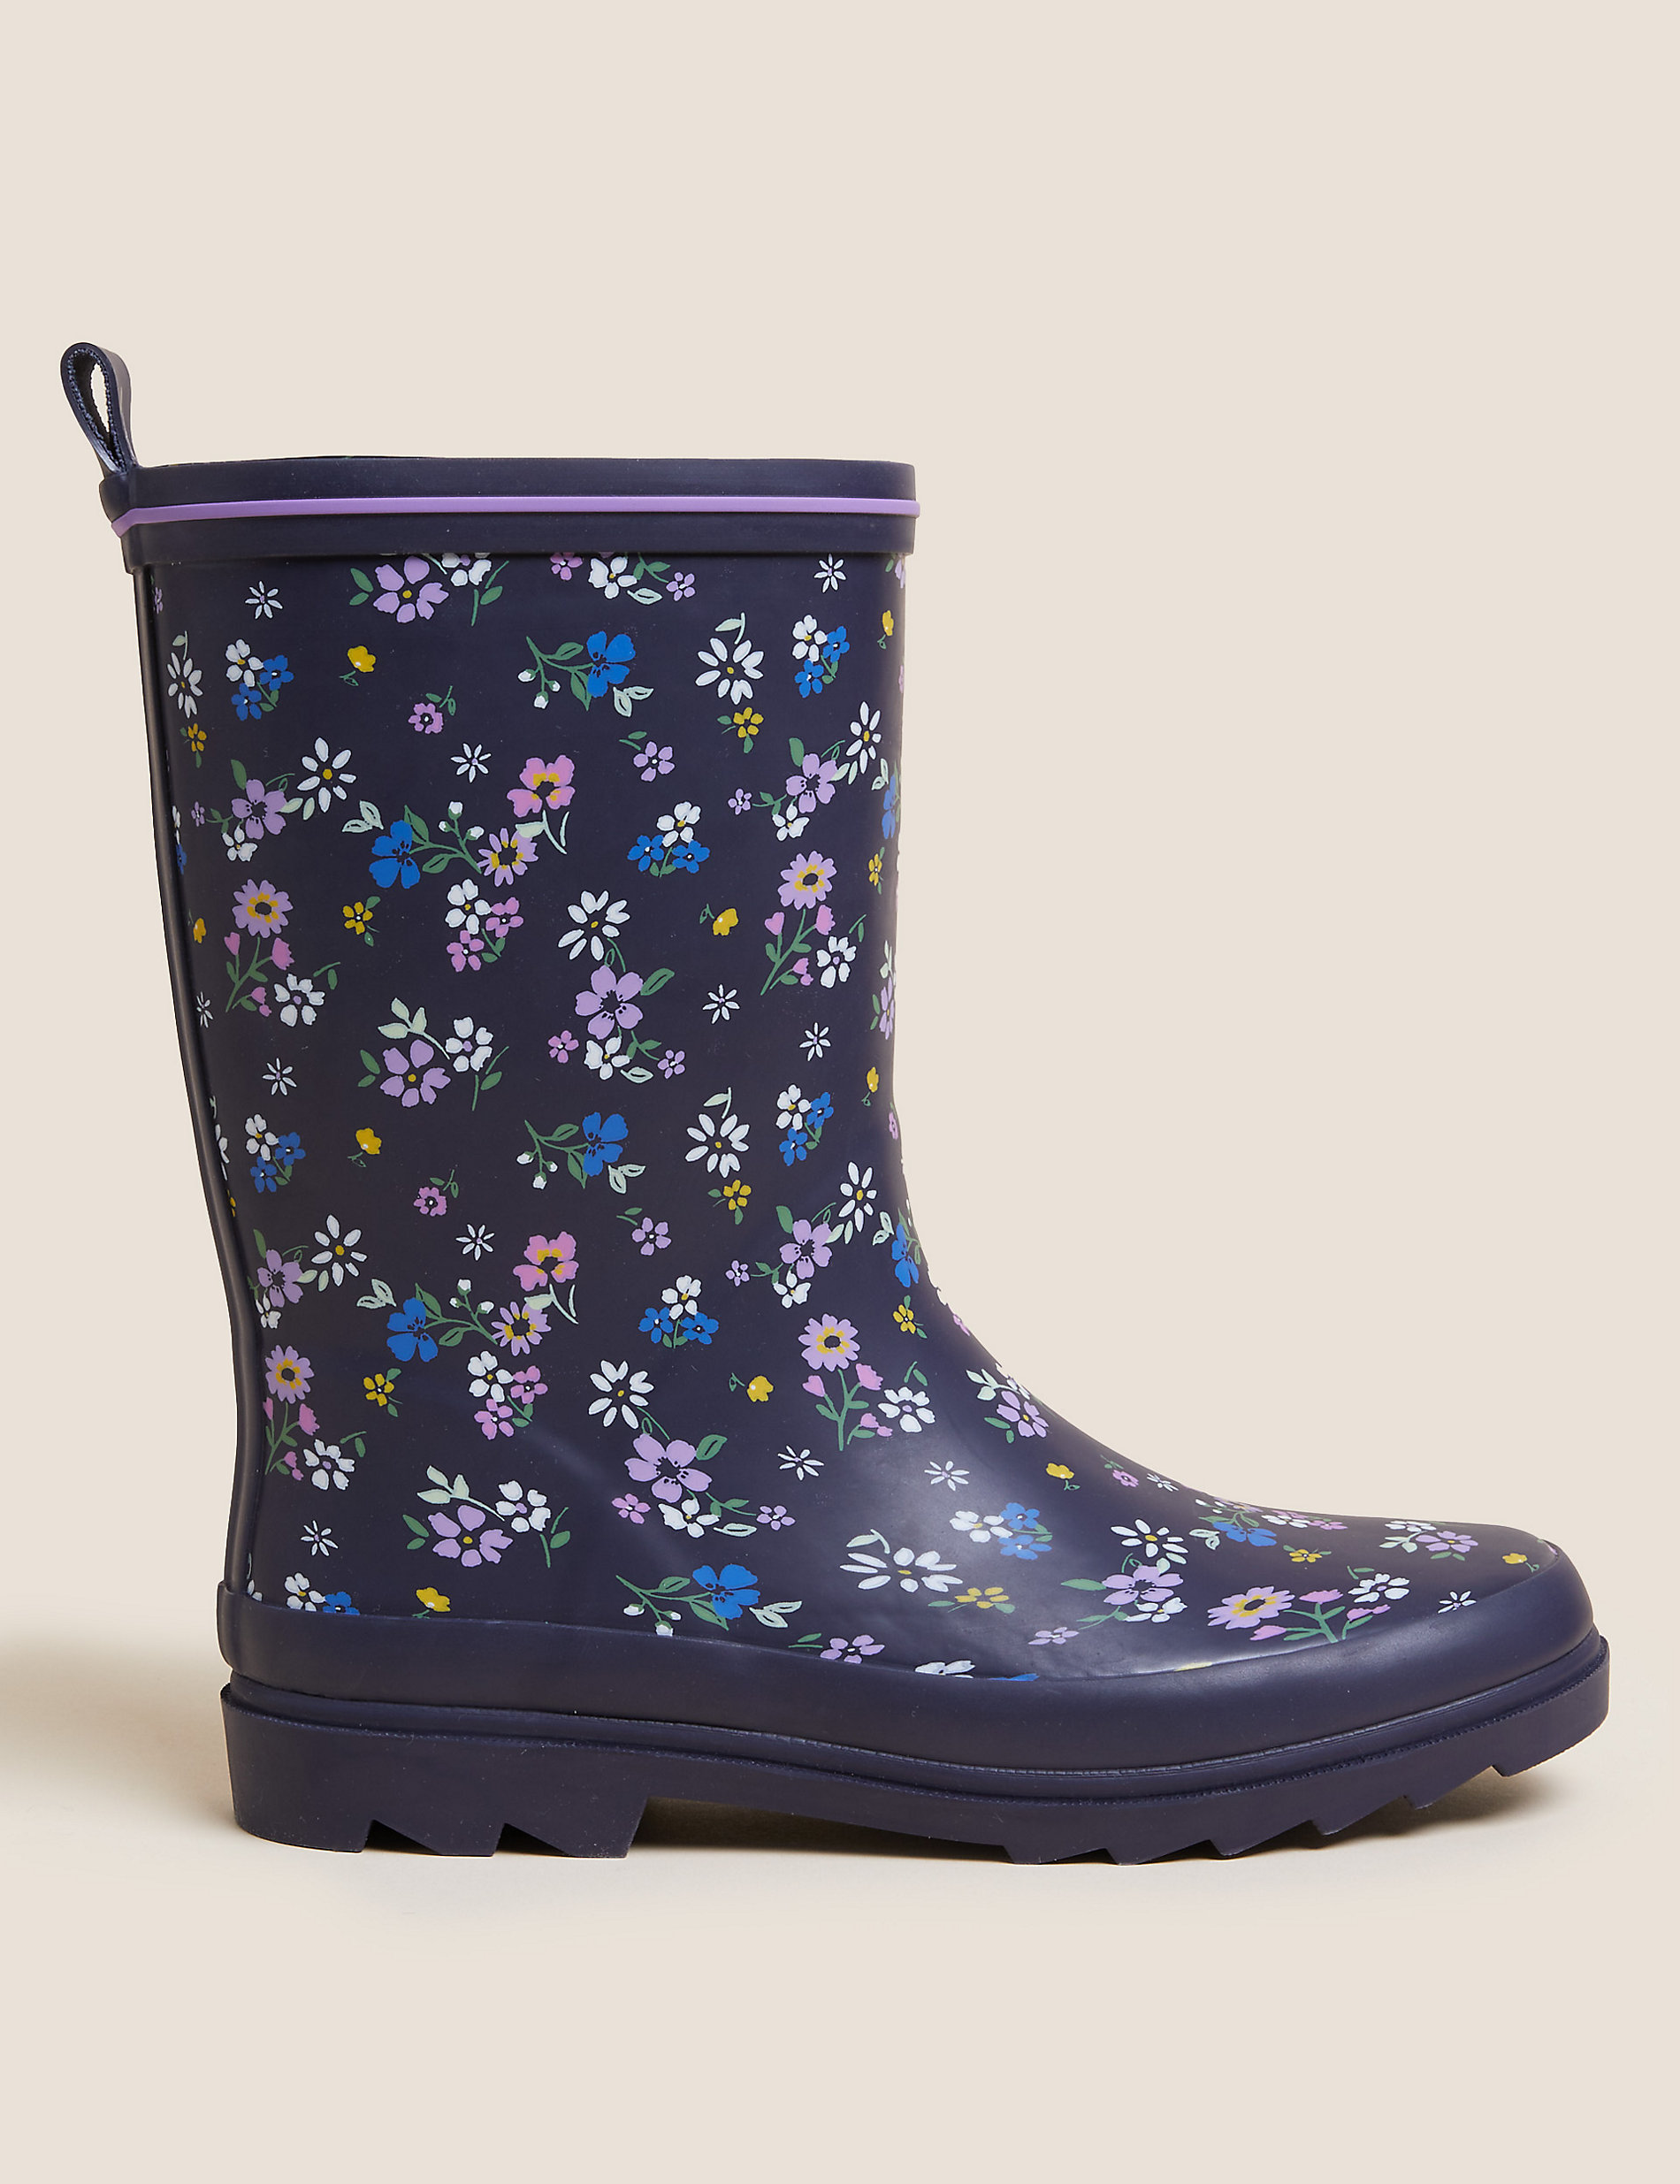 Marks & Spencer Girls Shoes Boots Rain Boots Kids Floral Wellies 13 Small 